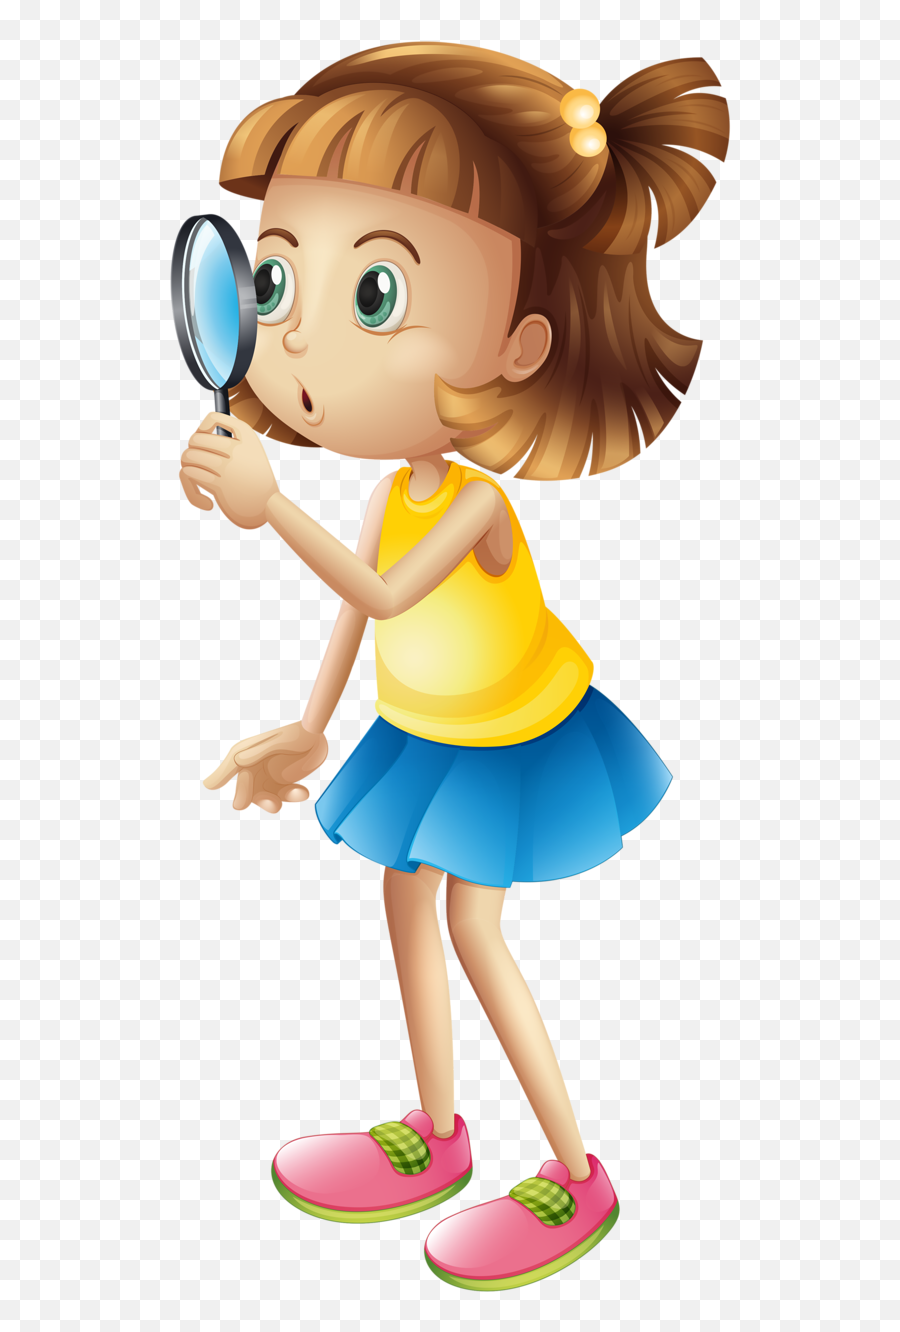 Daycare Png - Nnre 50zv Girl With Magnifying Glass Clipart Cartoon Girl Thinking Clipart Emoji,Daycare Clipart